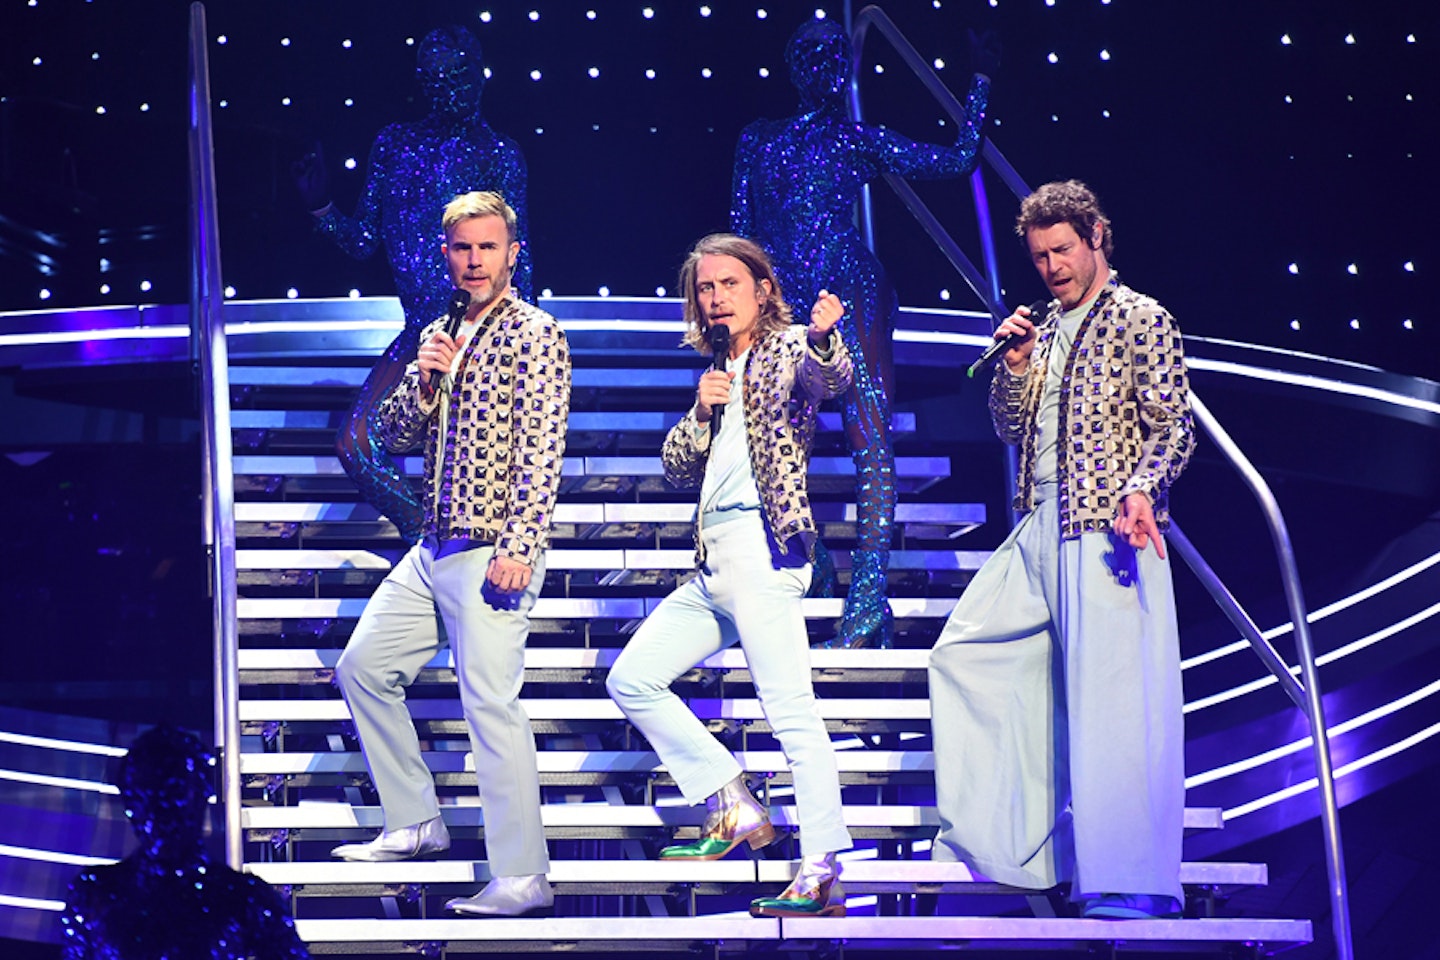 Take That on their Greatest Hits Live 2019 tour